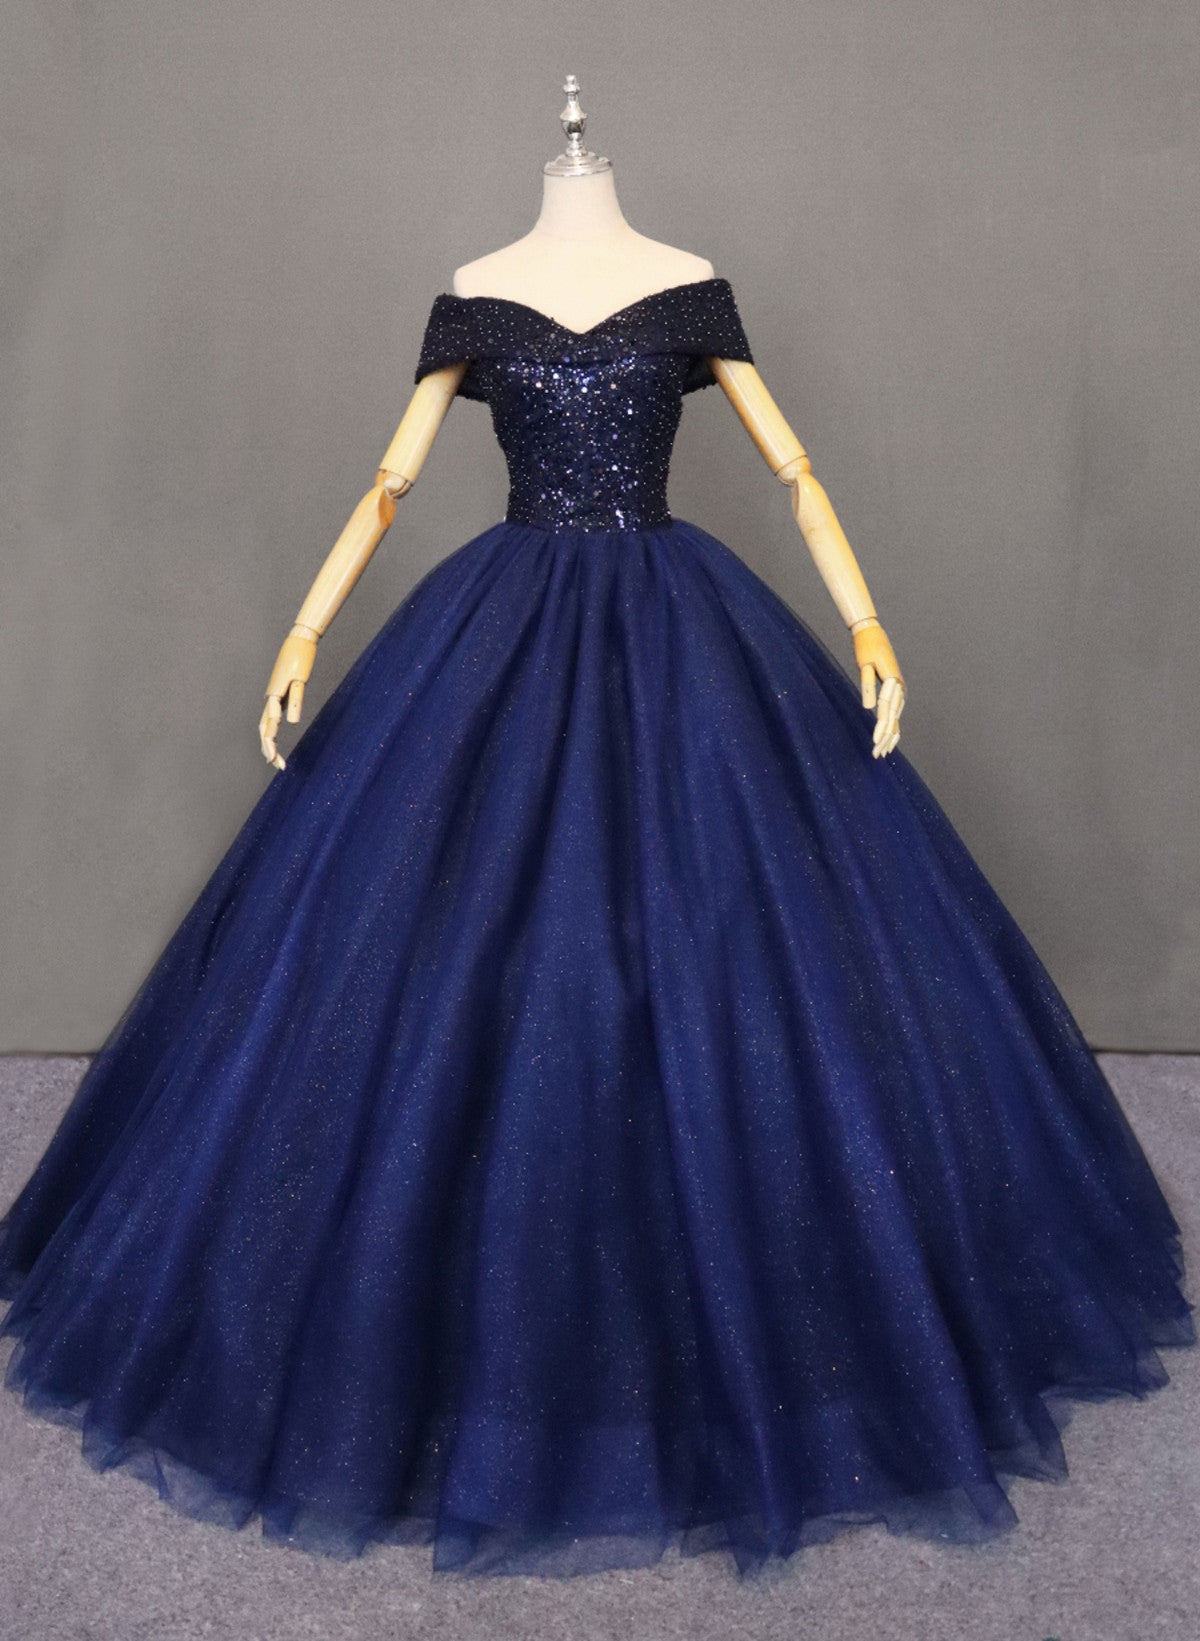 Navy Blue Tulle Beaded Ball Gown Sweet 16 Dress Outfits For Girls, Blue Tulle Prom Dress Outfits For Women Party Dress